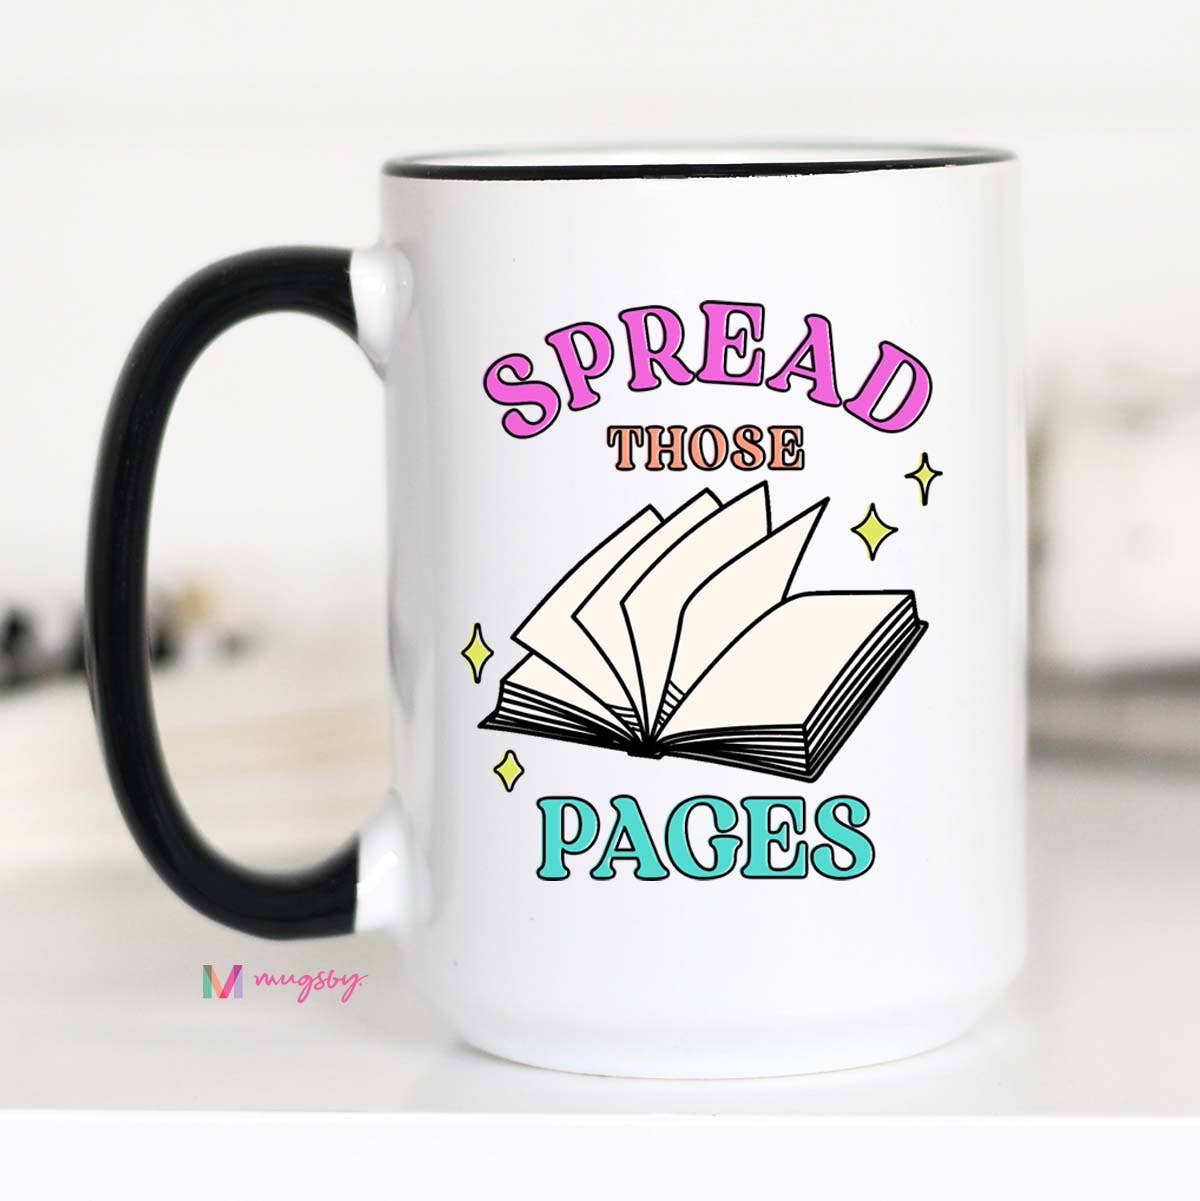 Spread Those pages Funny Coffee Mug, Book Cup: 11oz